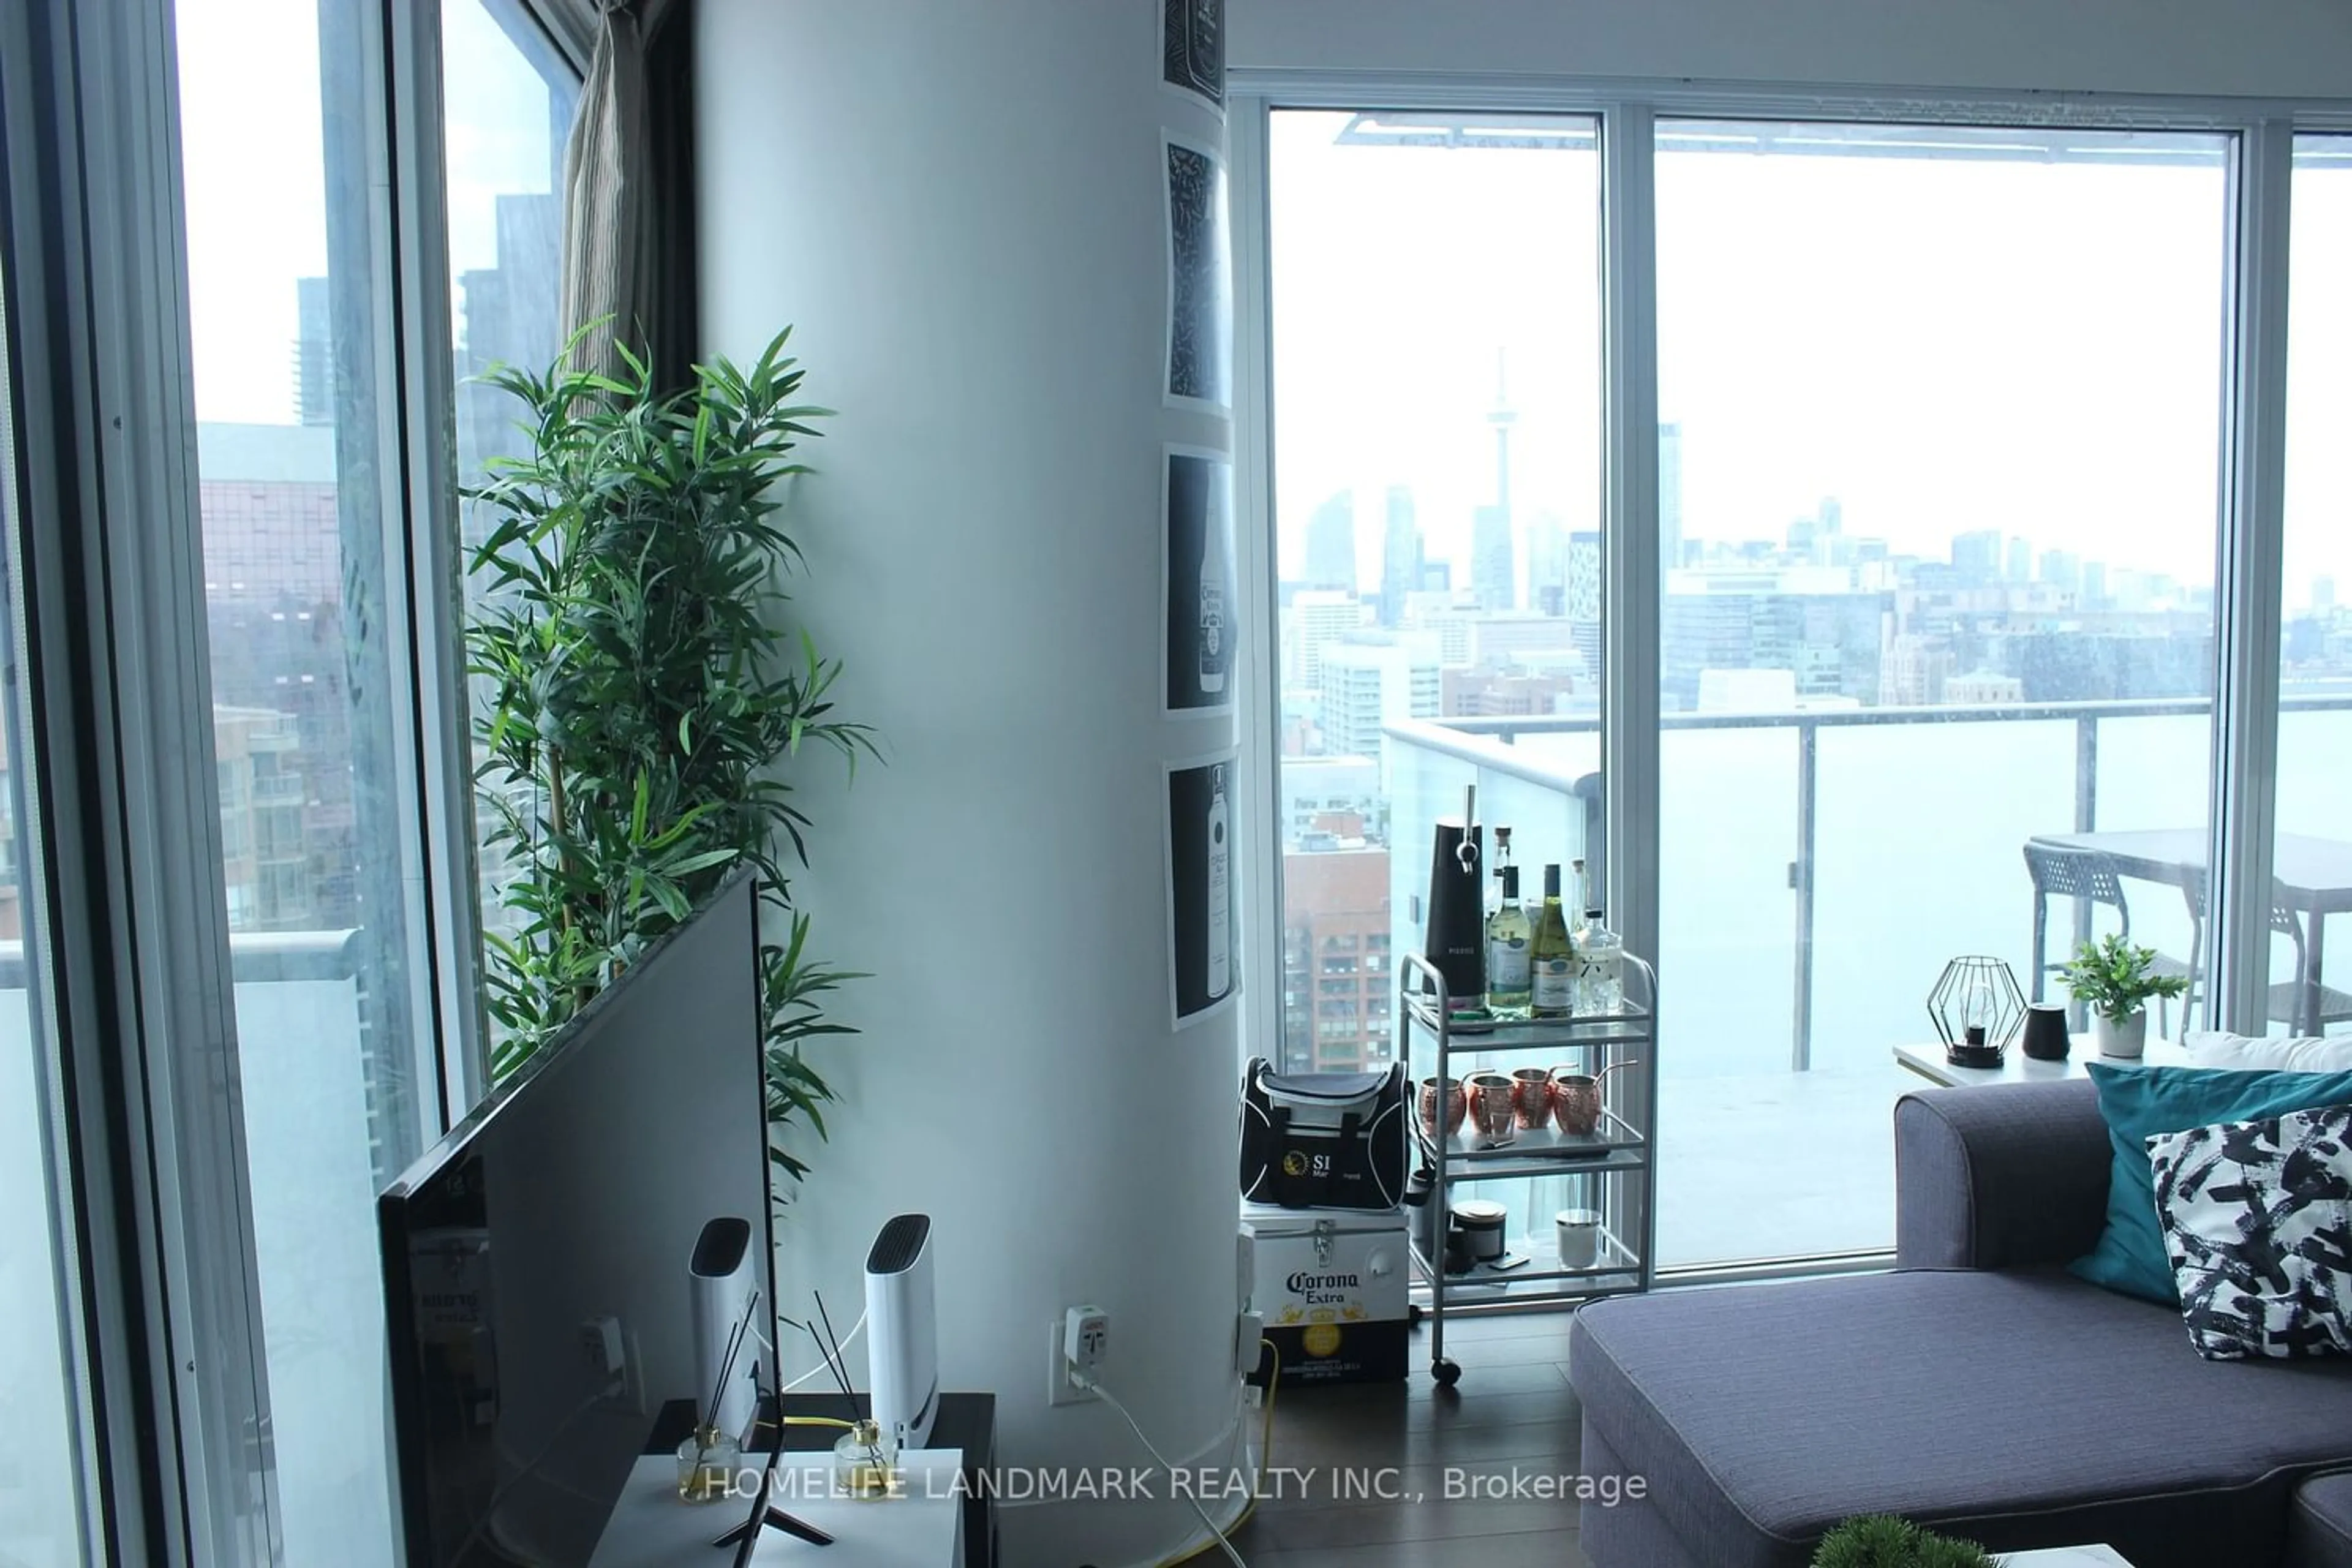 Balcony in the apartment for 1080 Bay St ##2902, Toronto Ontario M5S 0A5